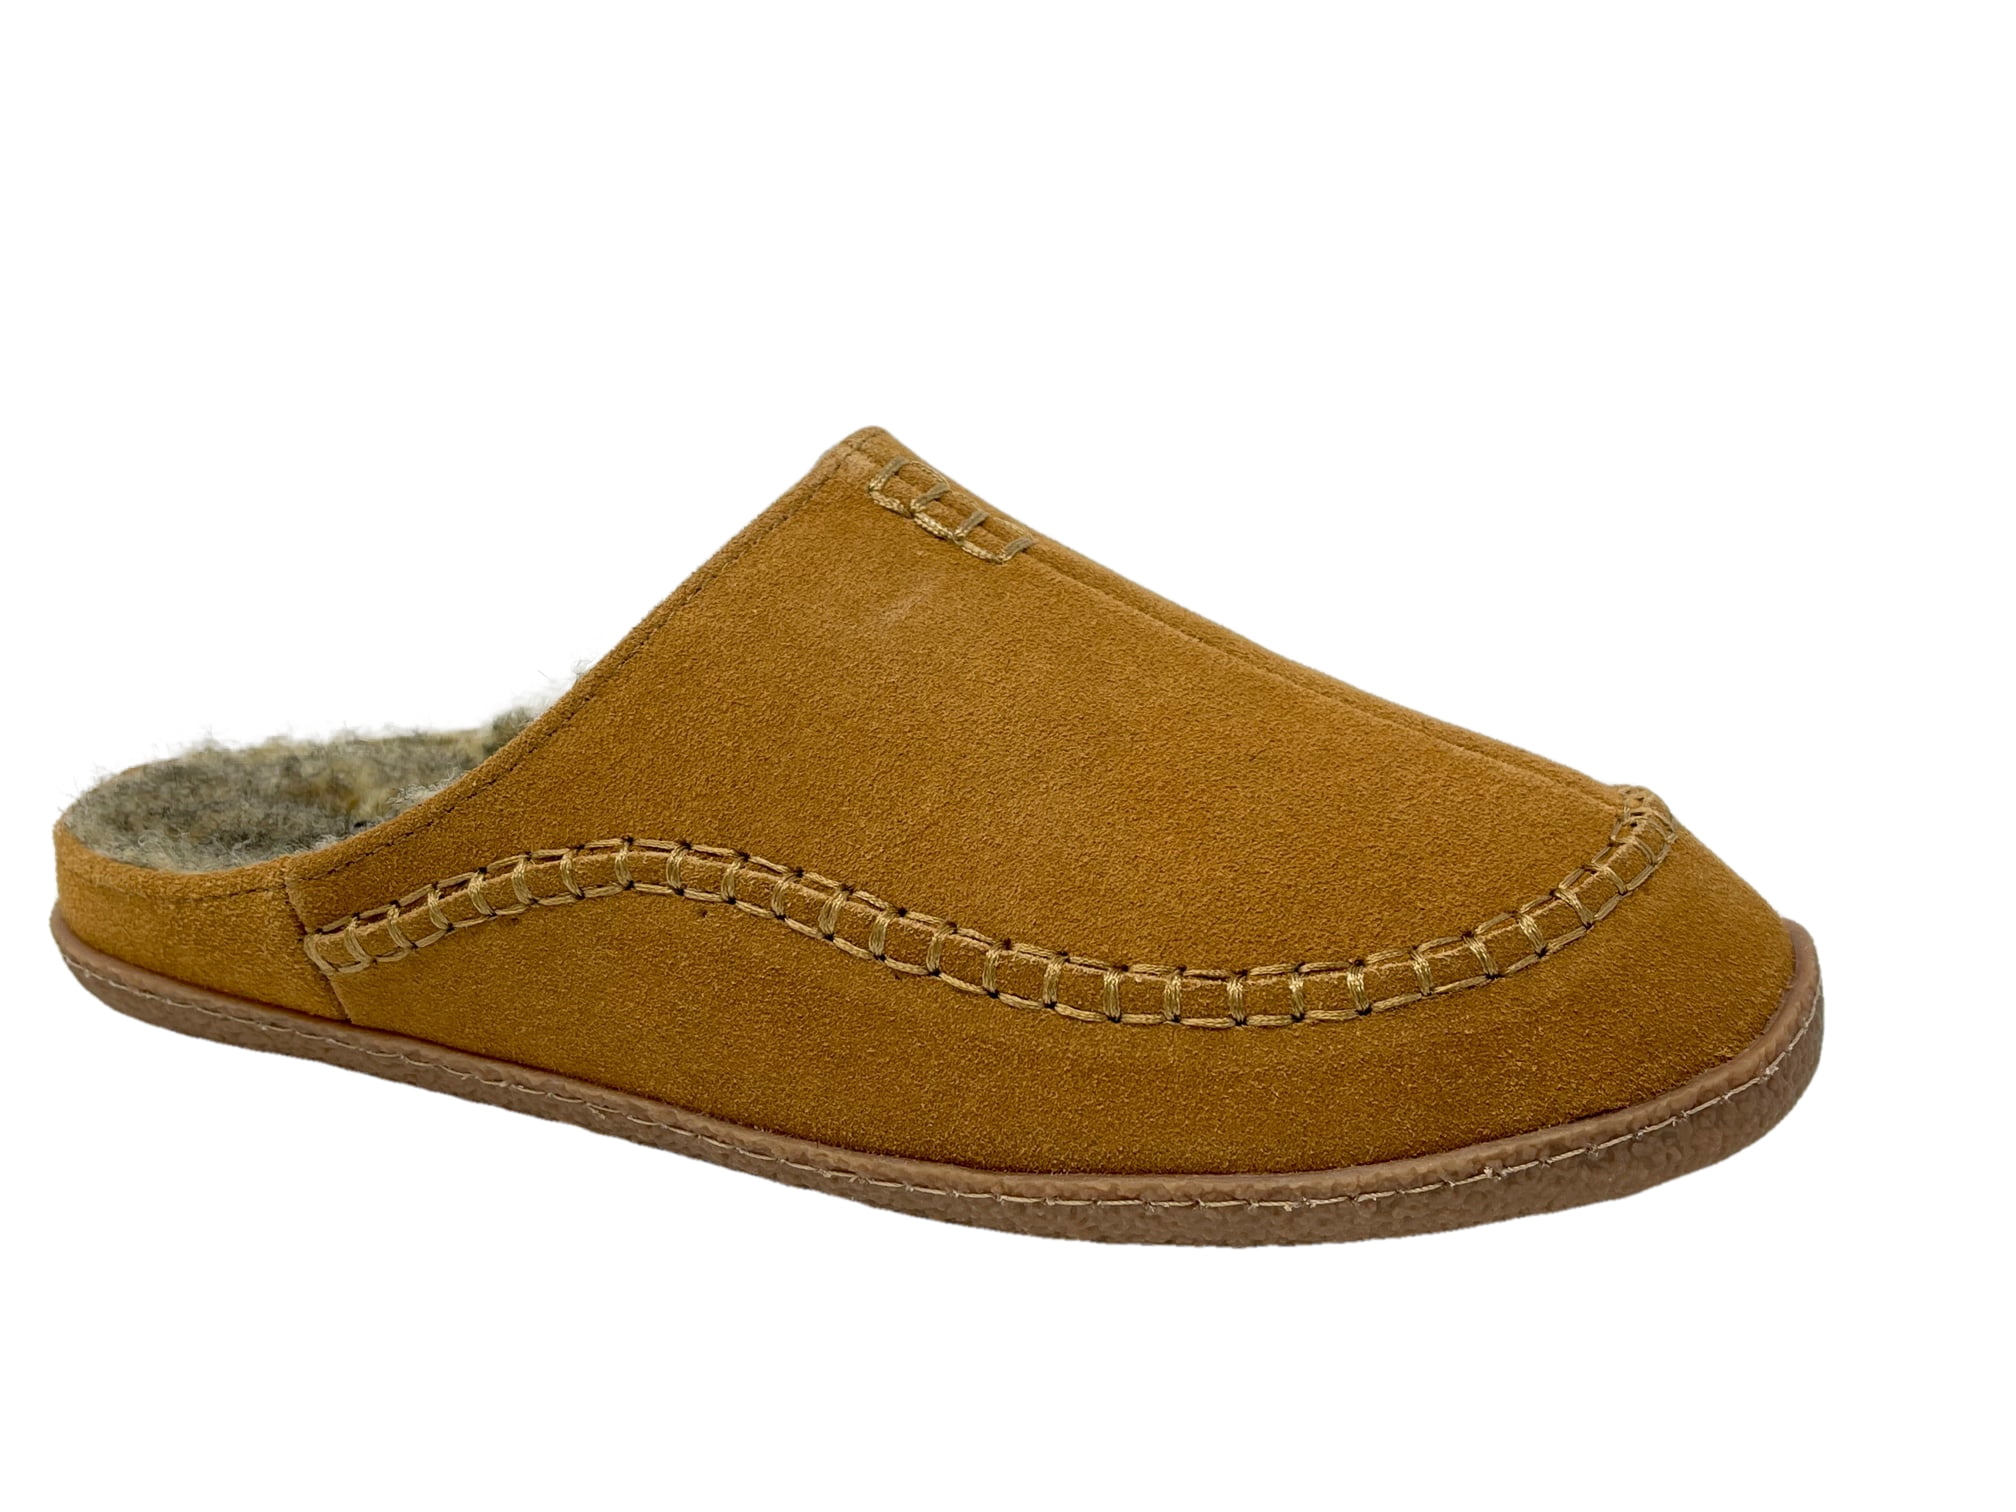 CLARKS MEN'S KITE STITCH Nordic MULE SLIPPERS BROWN LEATHER SIZE 7-11G 